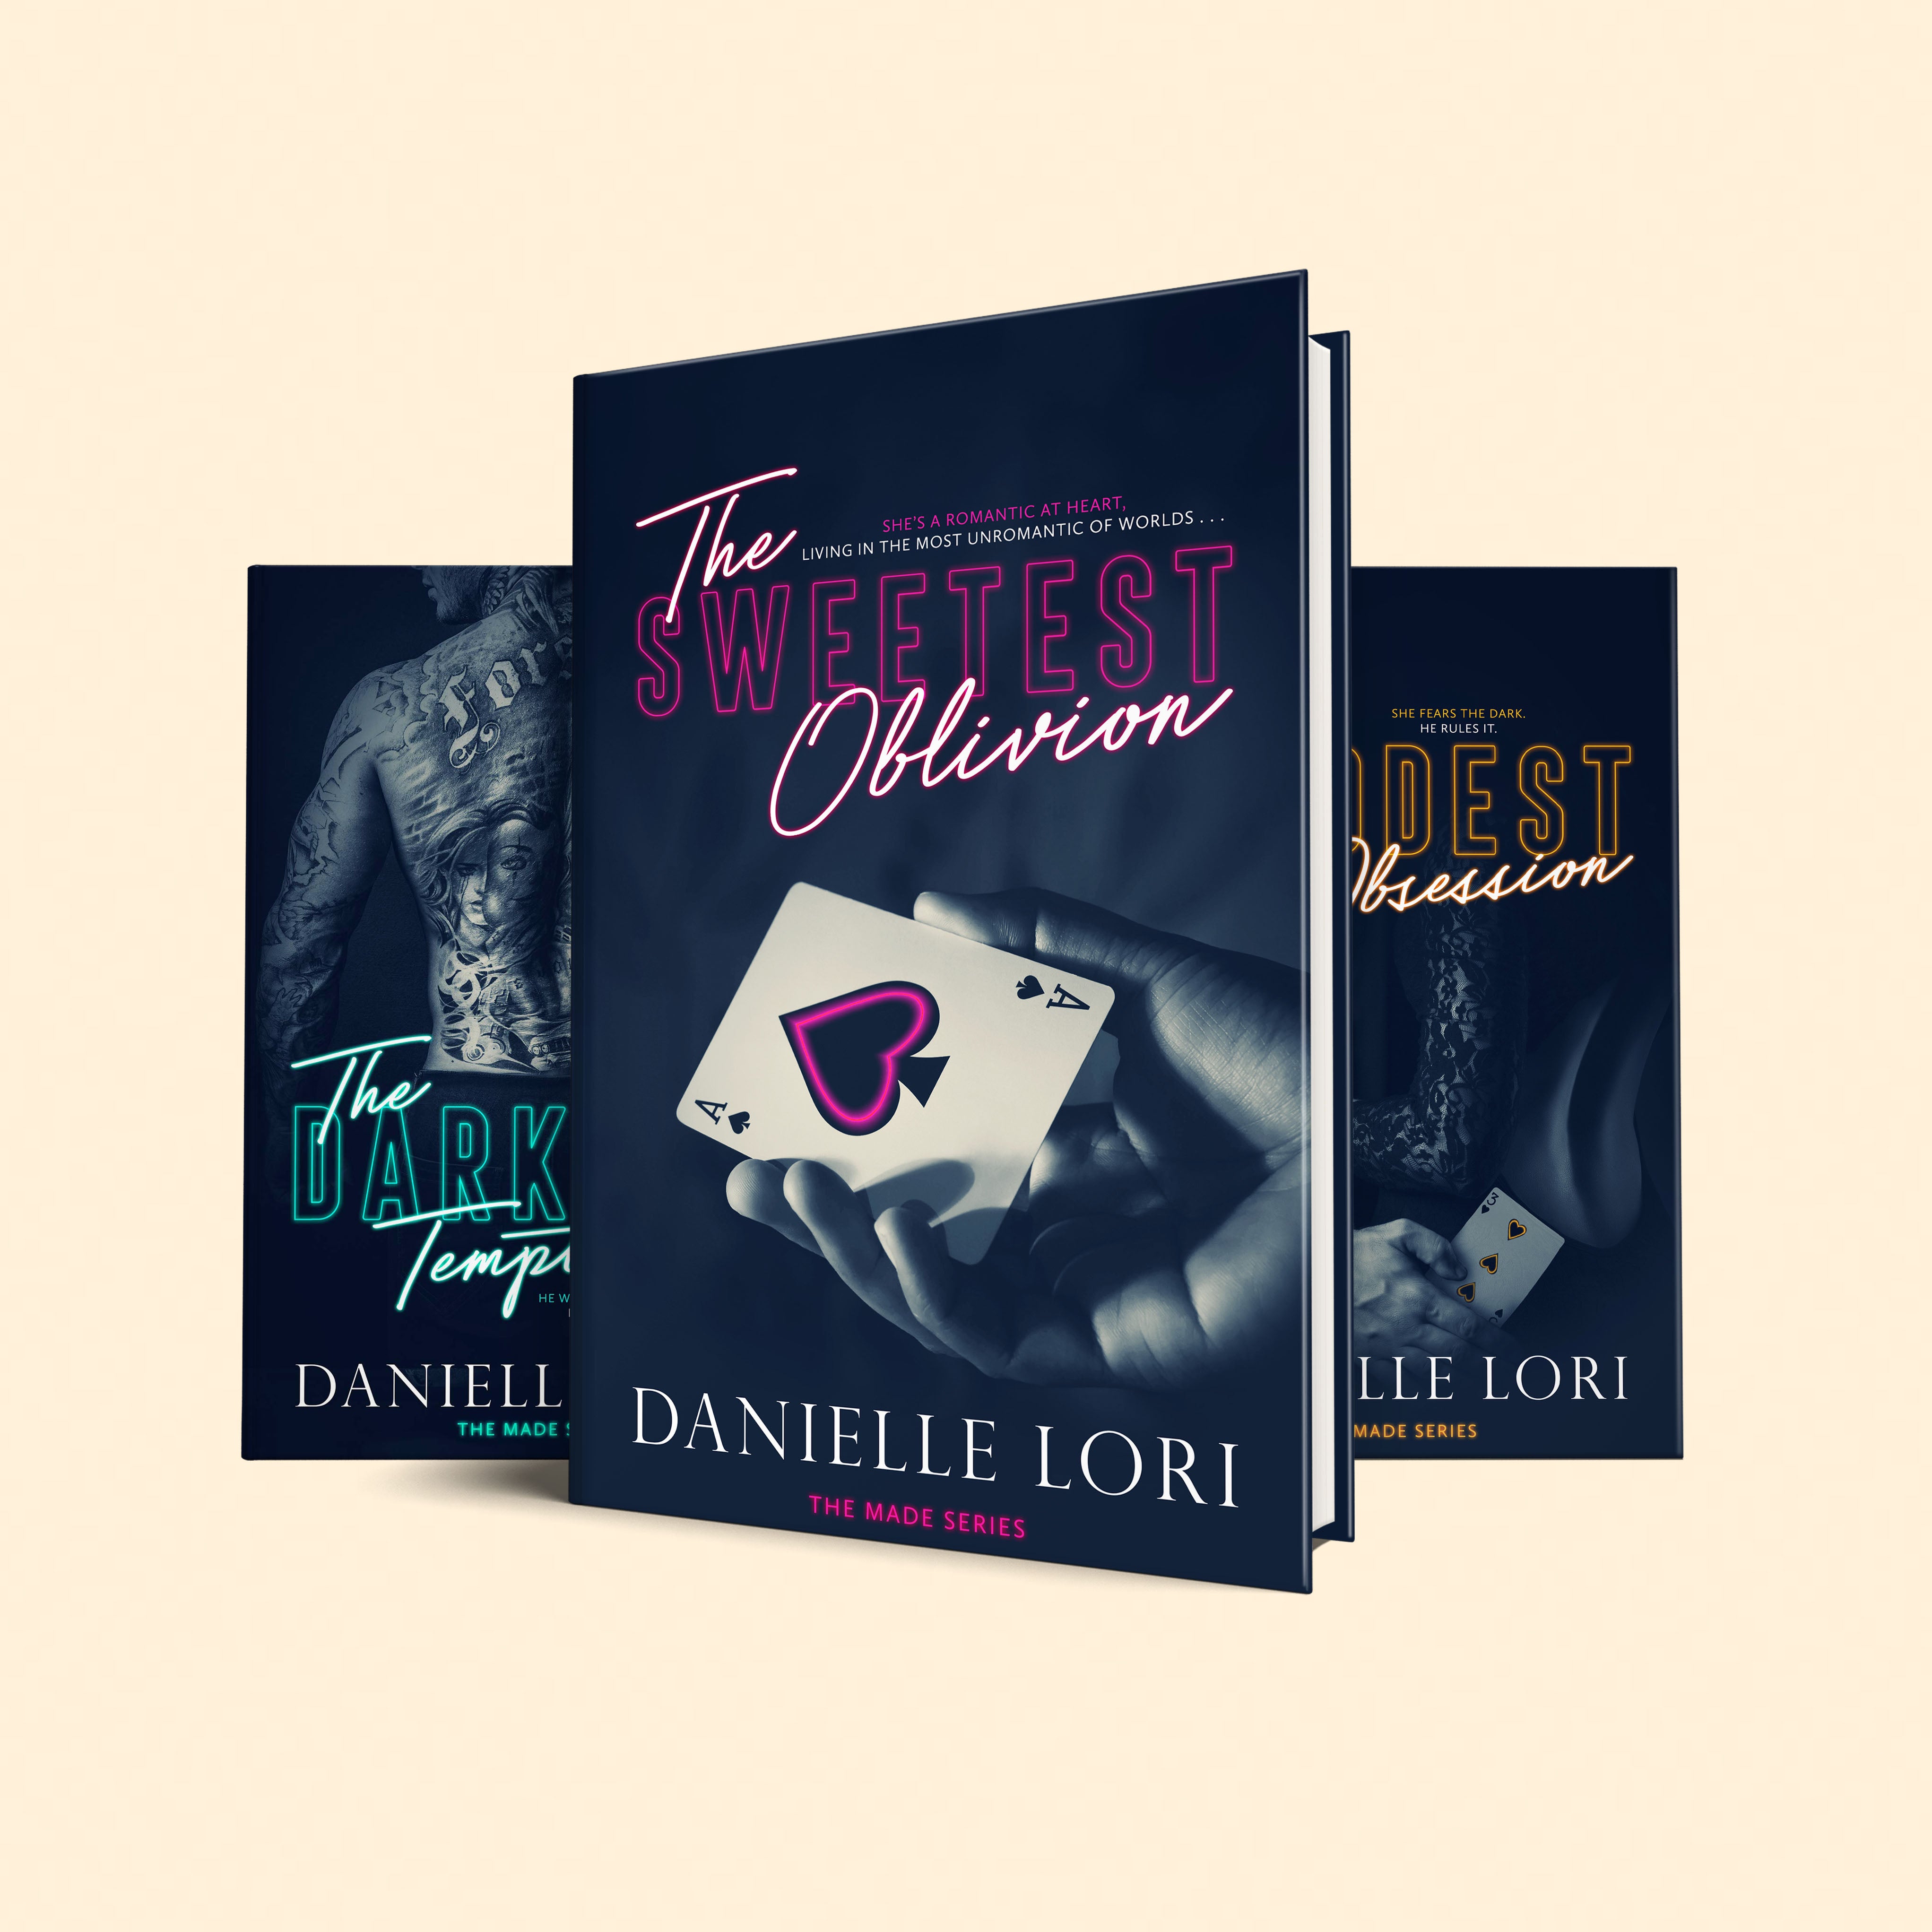 The complete Made Series: Sweetest oblivion; Maddest obsession; Darkes